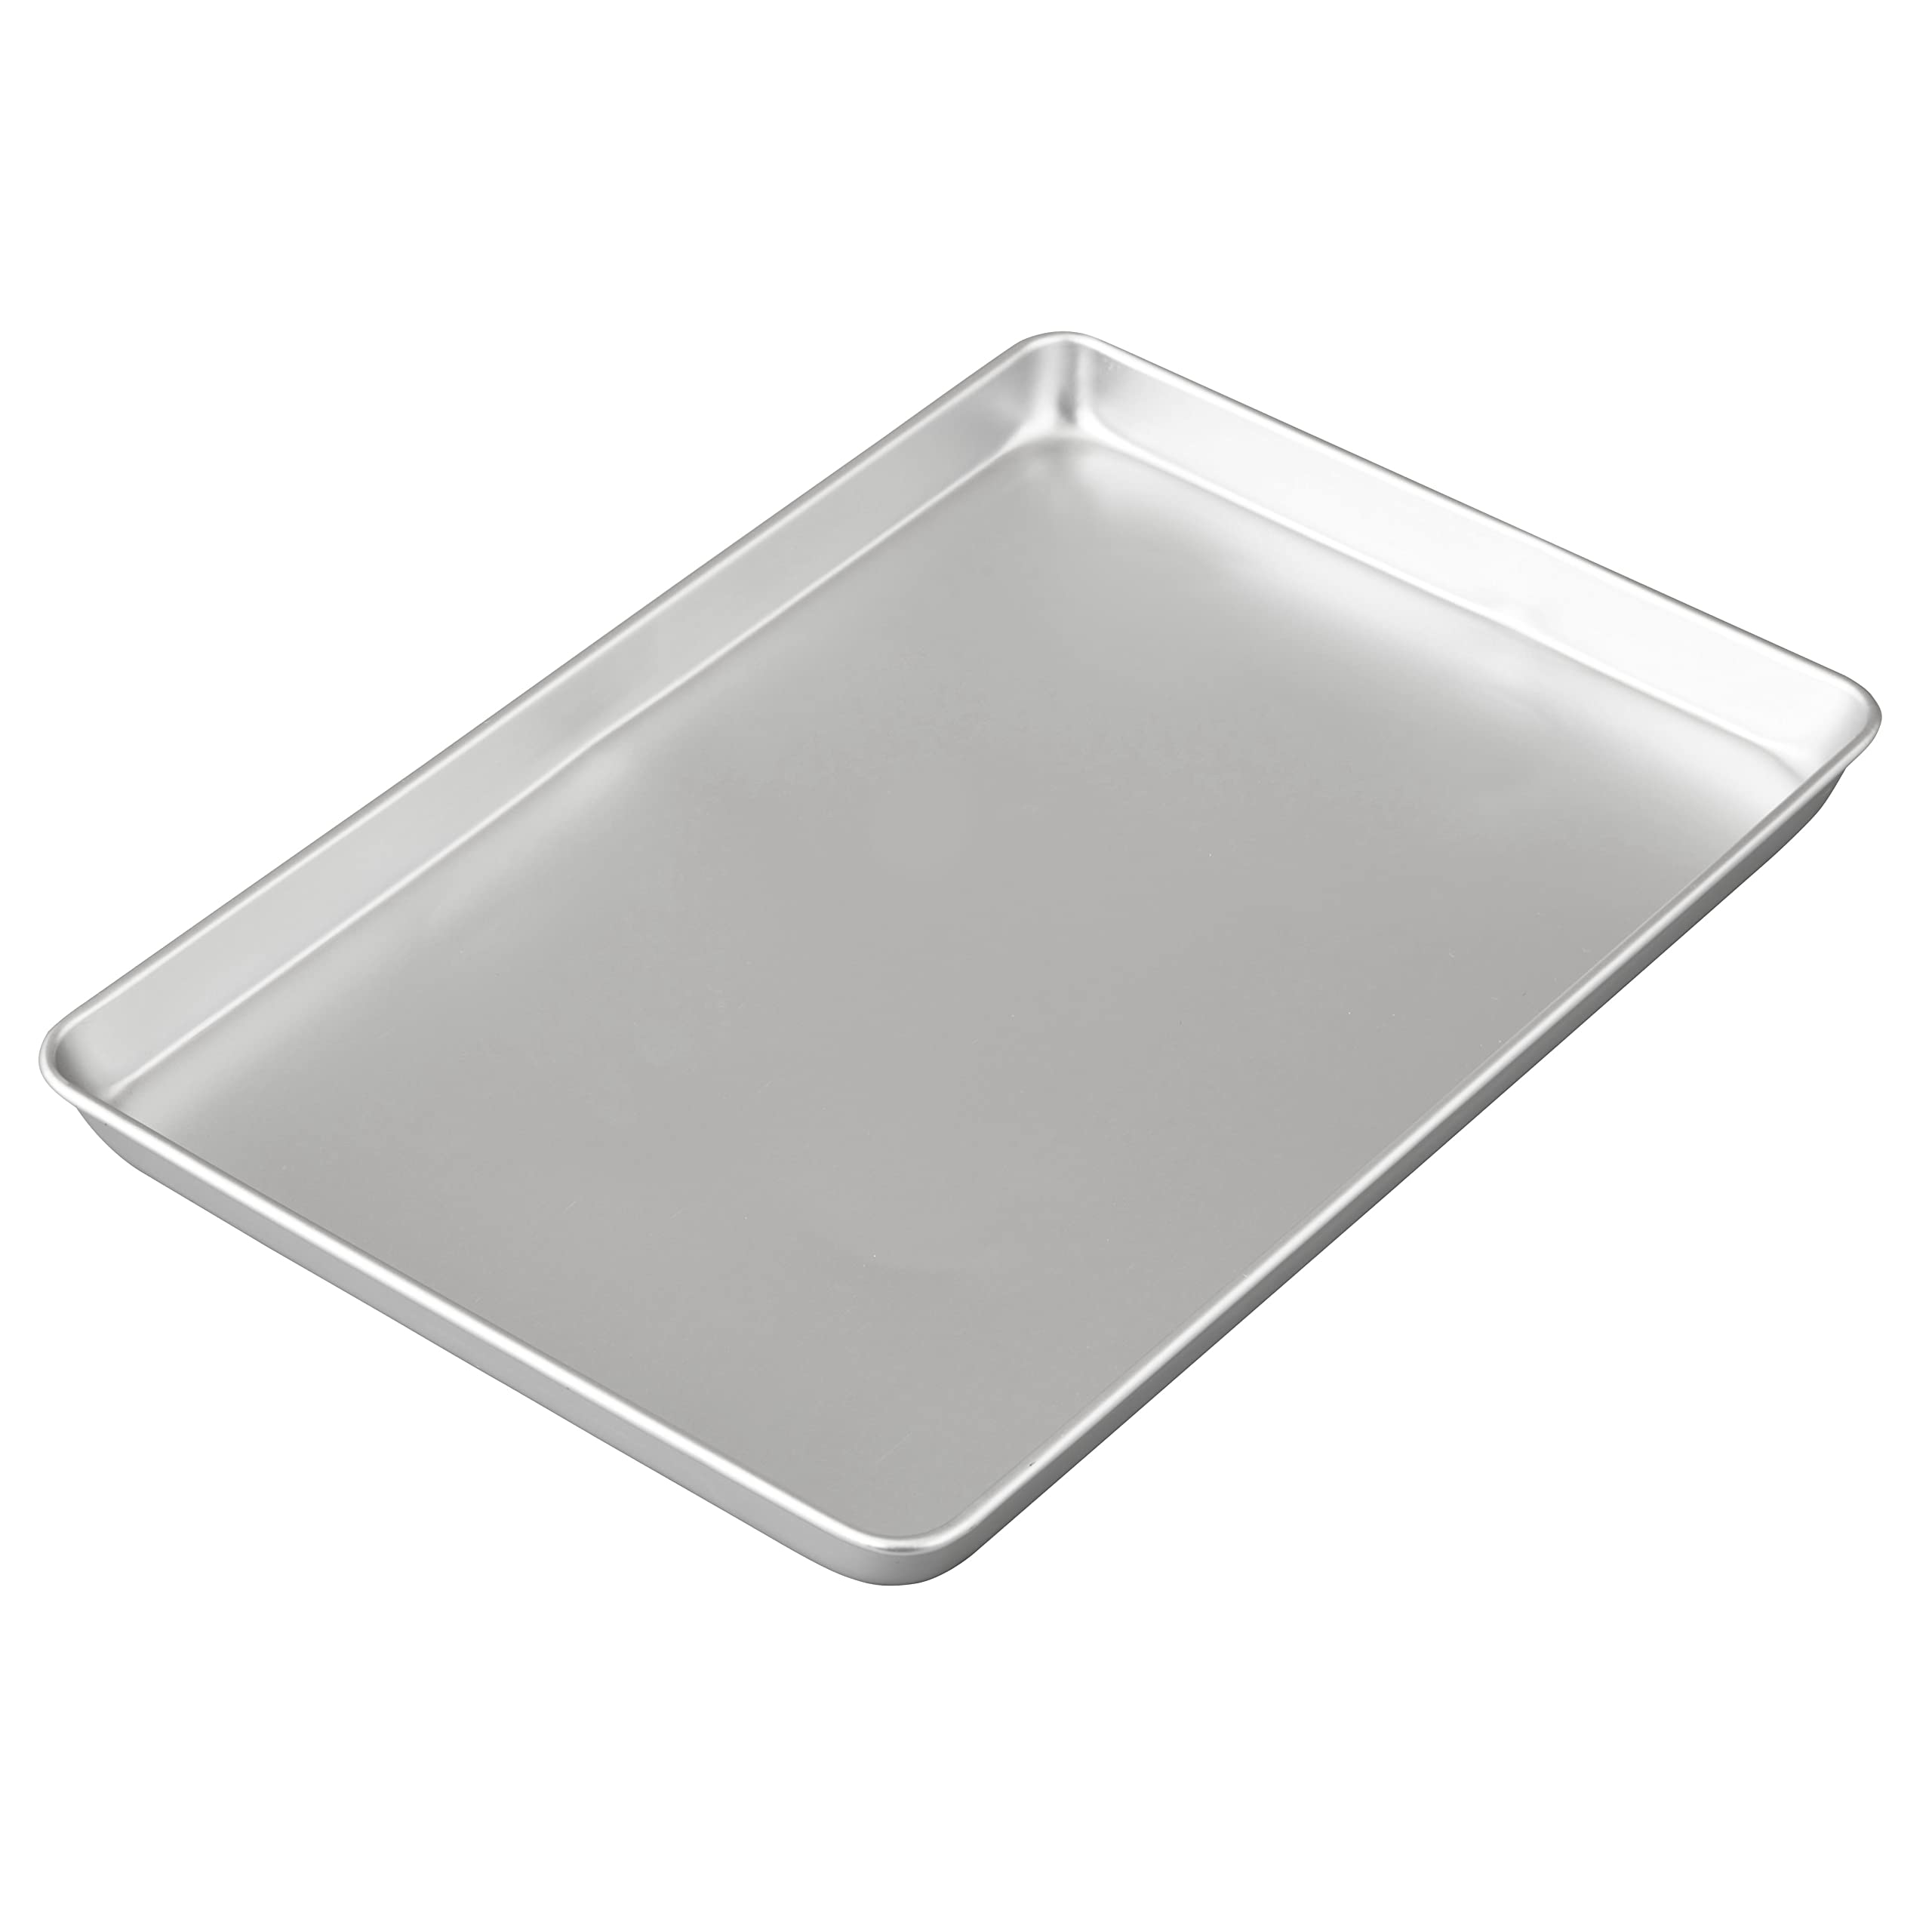 Wilton Performance Pans Jelly Roll Pan